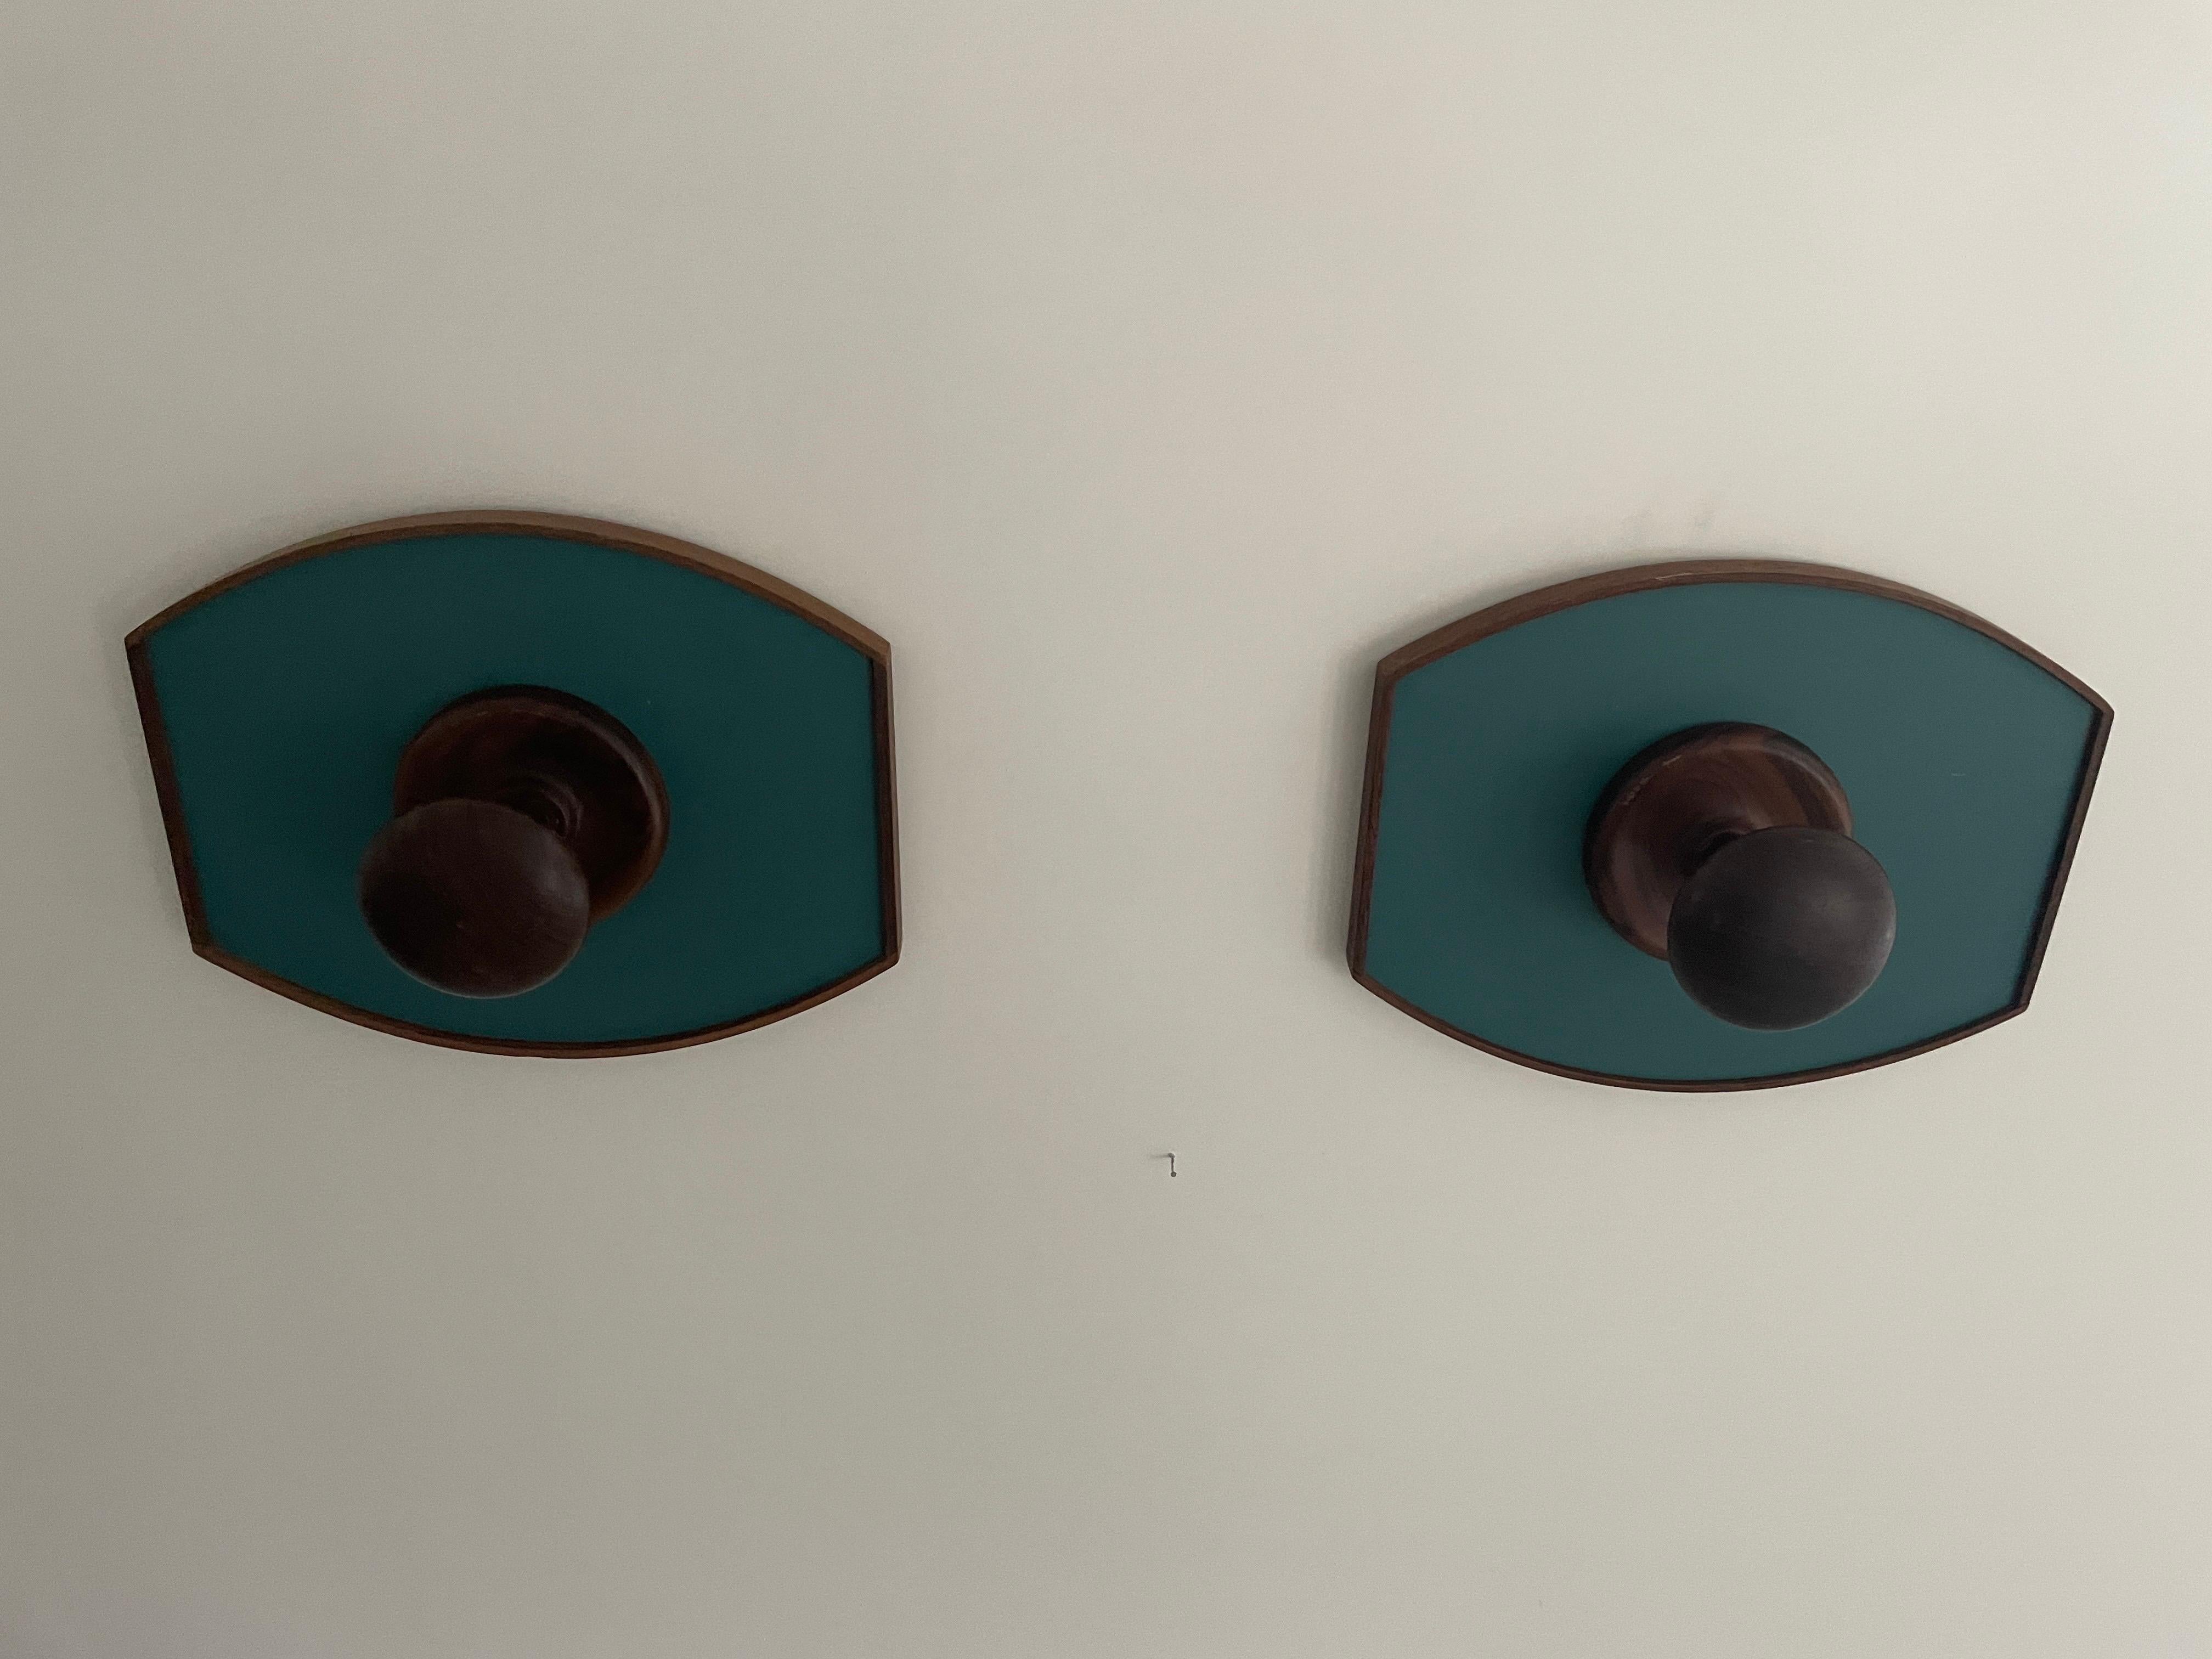 Mid Century Modern Teak Green Design Pair of Clothes Hooks, 1960s, Italy

Measurements: 
33 cm x 27 cm x 13 cm

Please do not hesitate to ask us if you have any questions.




.